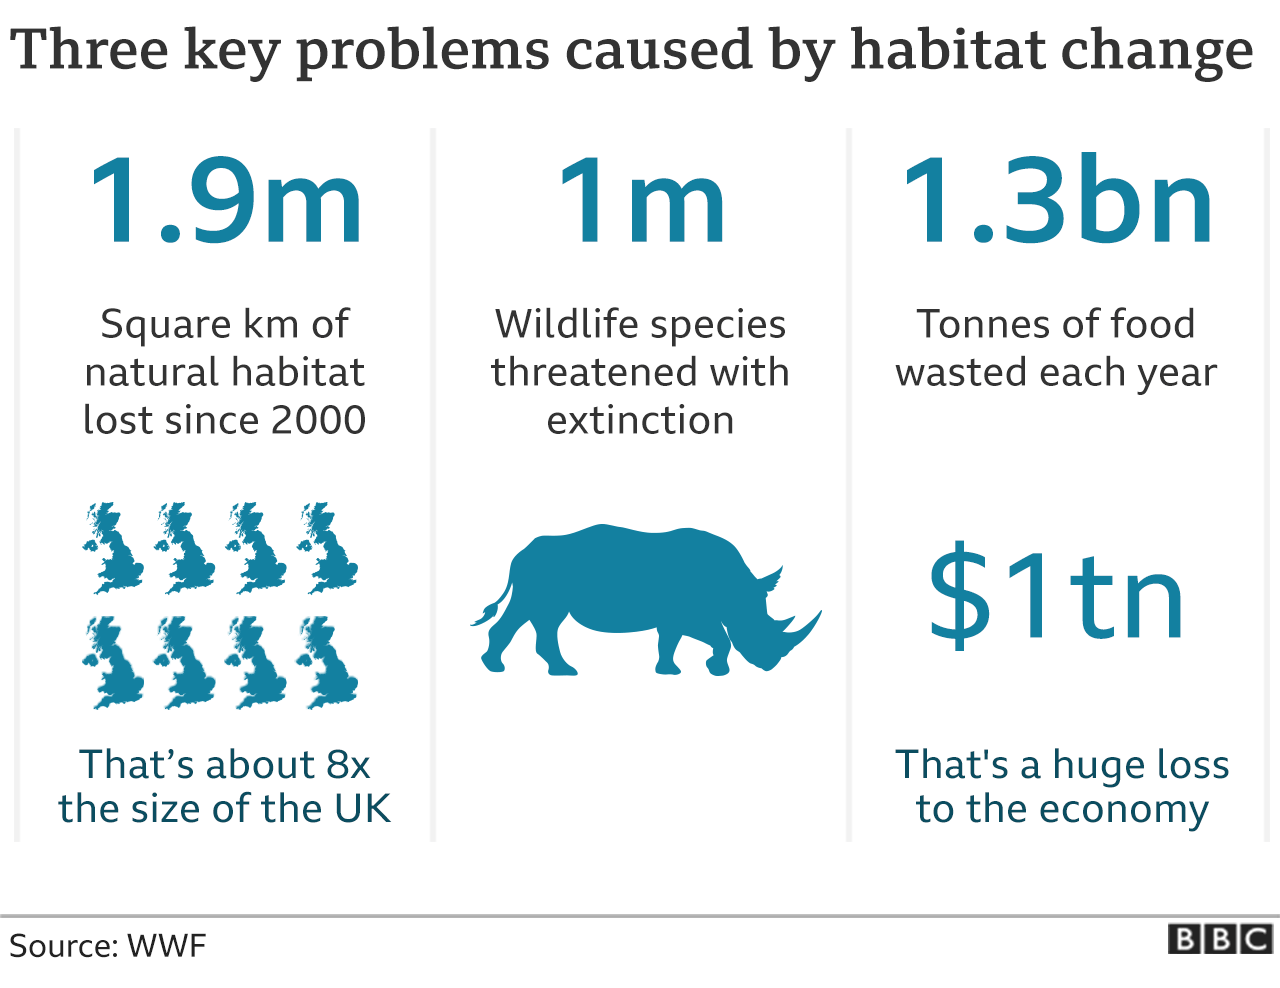 Problems caused by habitat loss